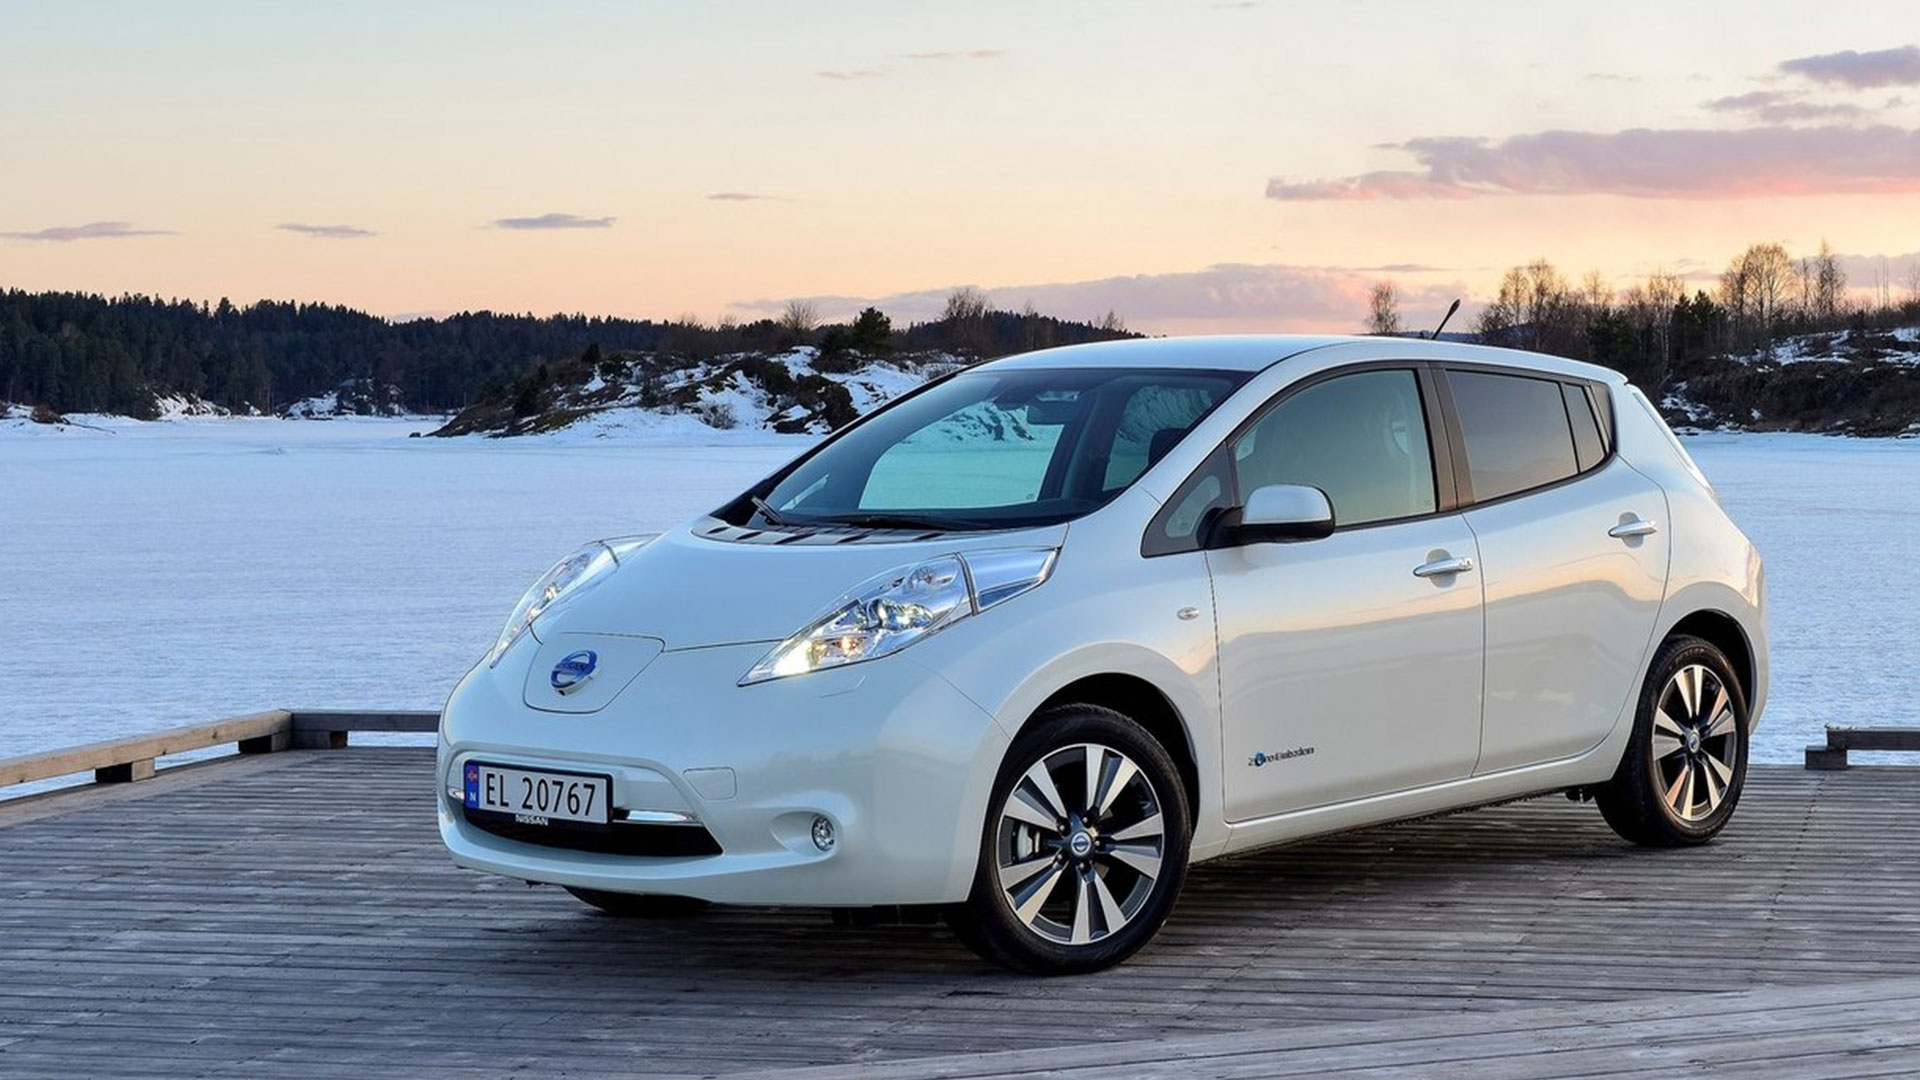 What is the range of a nissan leaf